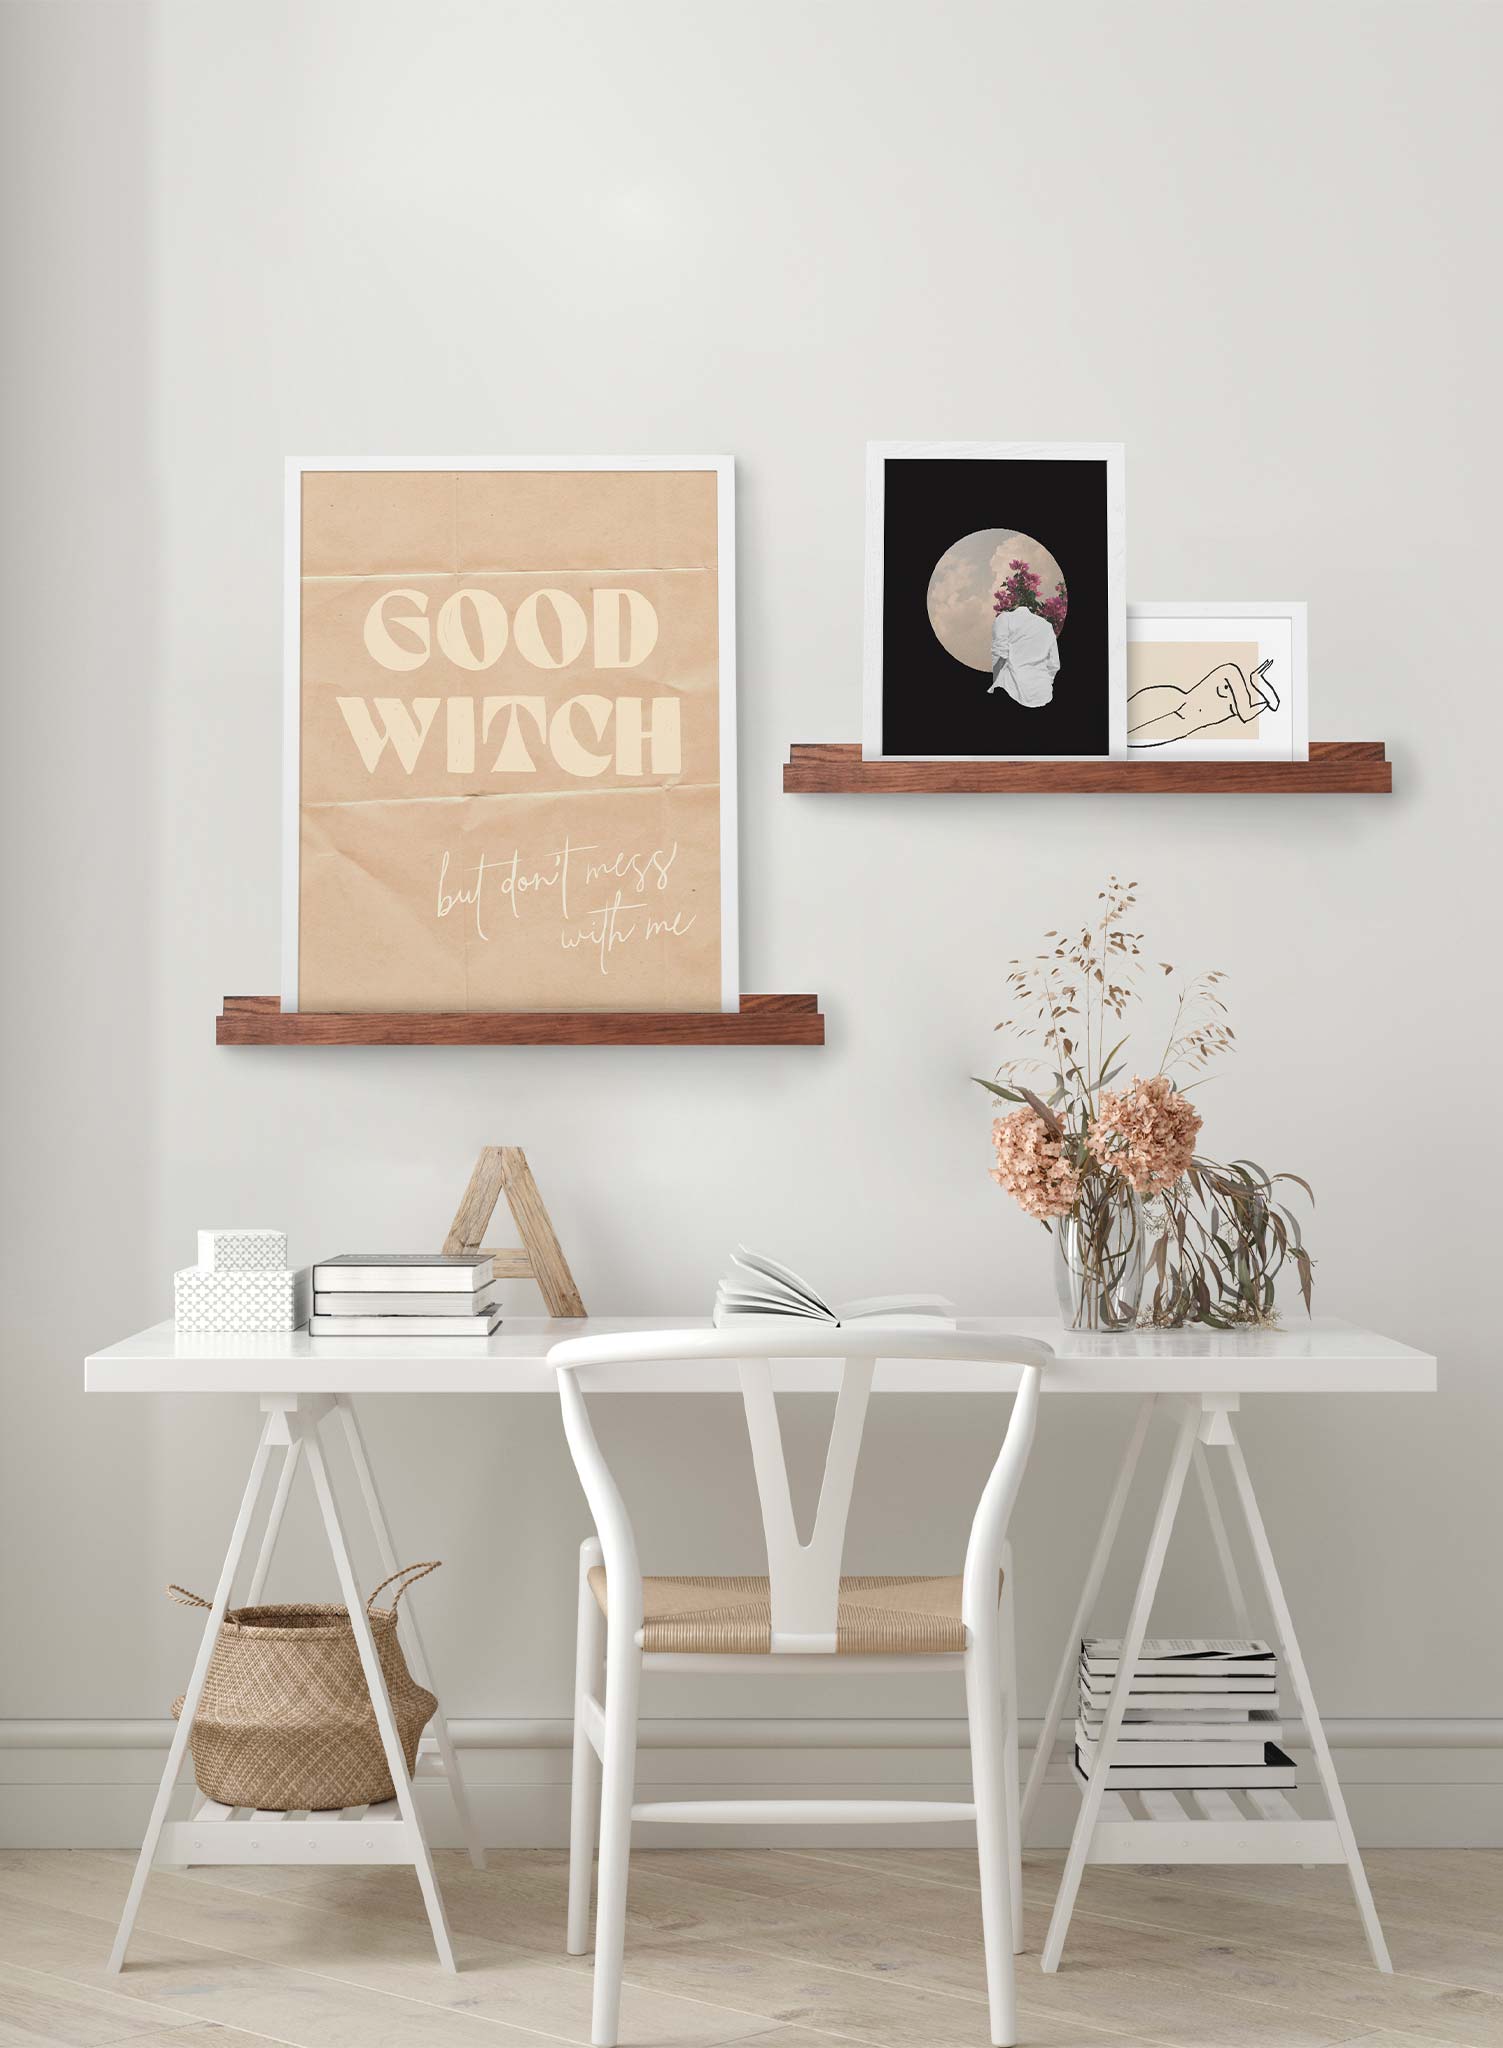 Bewitched is an typography and illustration of the words 'Good Witch' and 'but don't mess with me' on a folded beige paper by Audrey Rivet in collaboration with Opposite Wall.